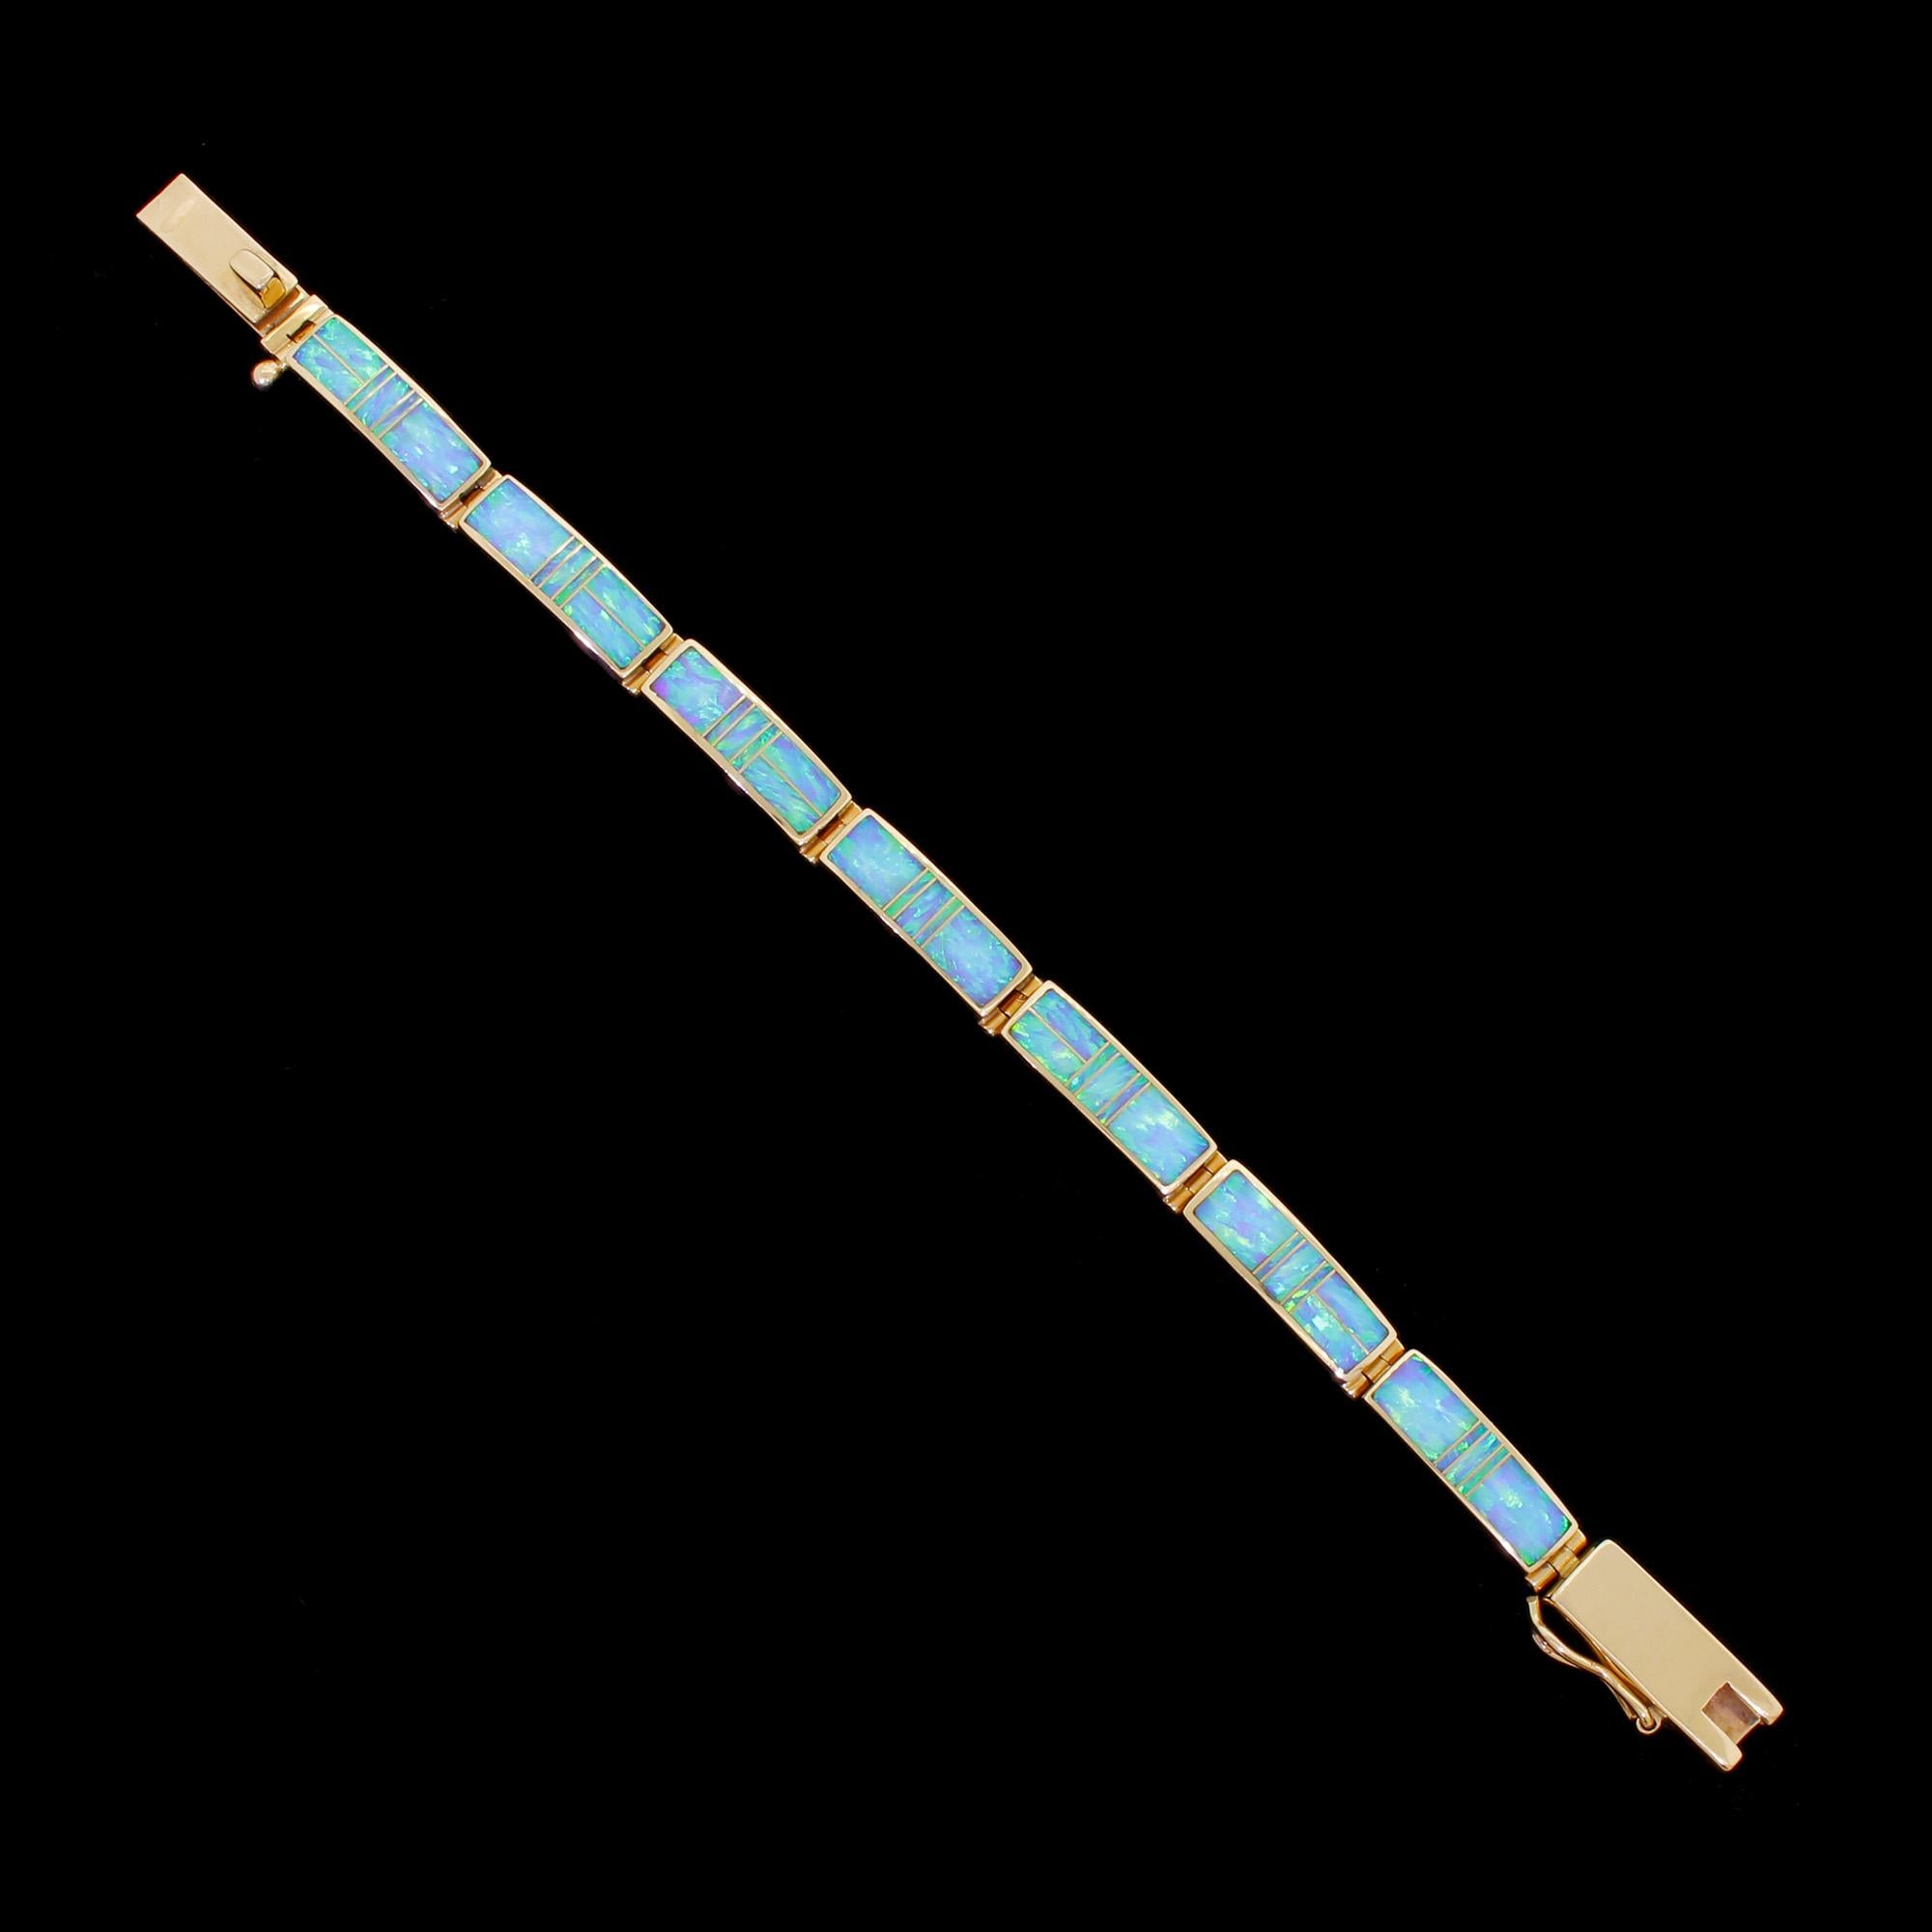 Beautiful 14K yellow gold & opal inlay bracelet by Native American artist Tim Charlie for SuperSmith. This artisanal Navajo bracelet is quite substantial at 27.1 grams. It is of high quality, and very well made. All the opal sections have a